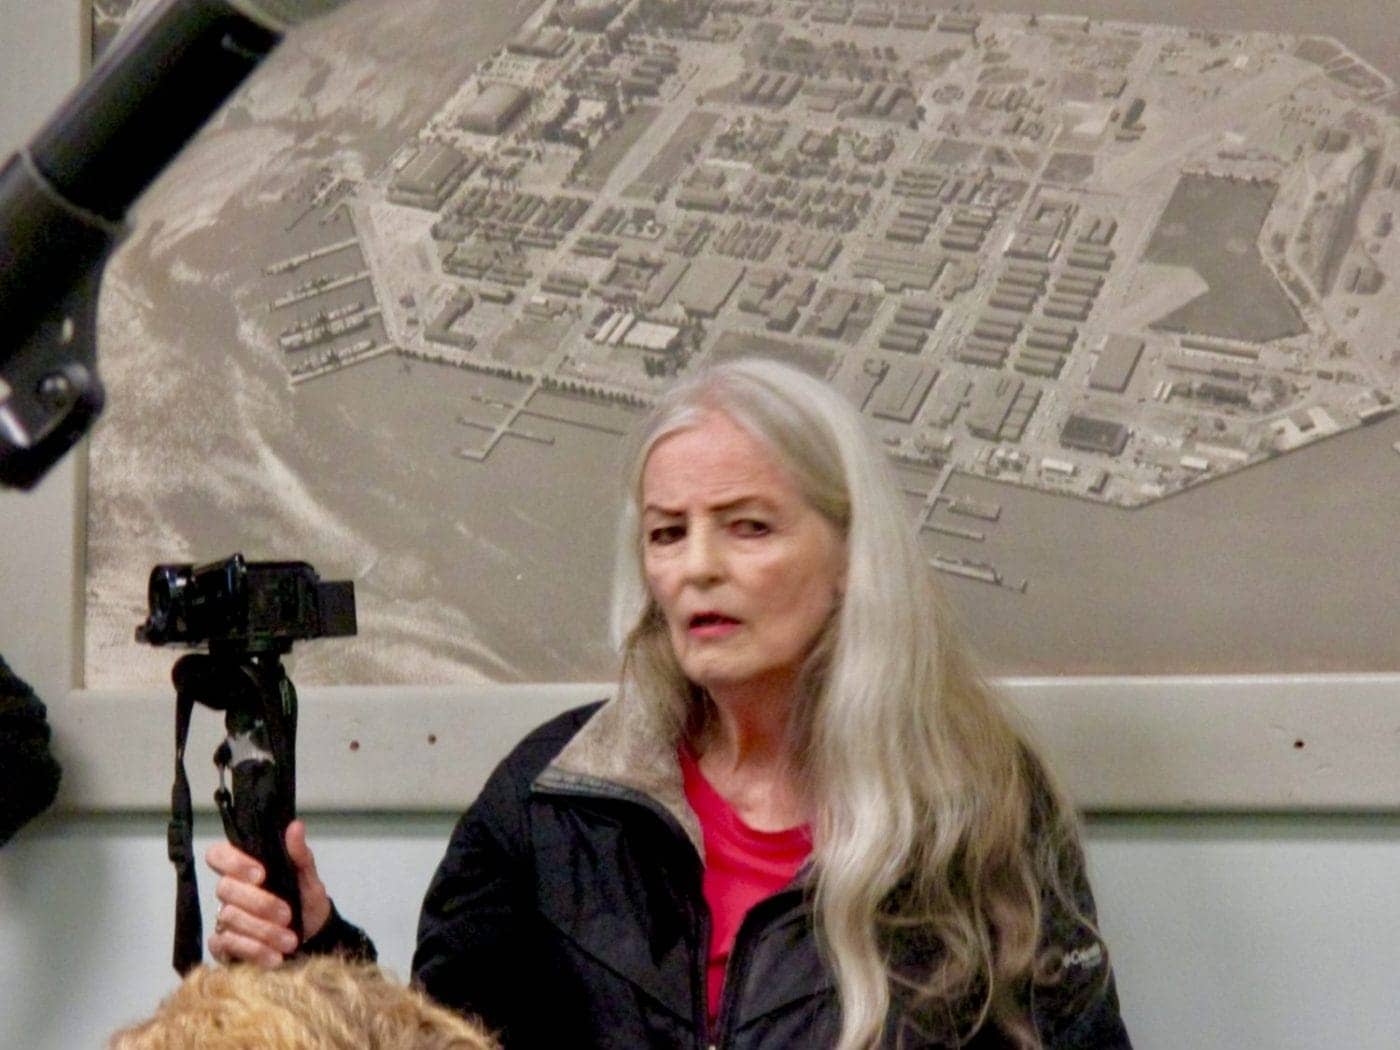 Carol-Harvey-Treasure-Island-1400x1050, Former Treasure Island residents report radiation and chemical poisoning during Feb. 8 SF Supervisors’ hearing, Local News & Views 